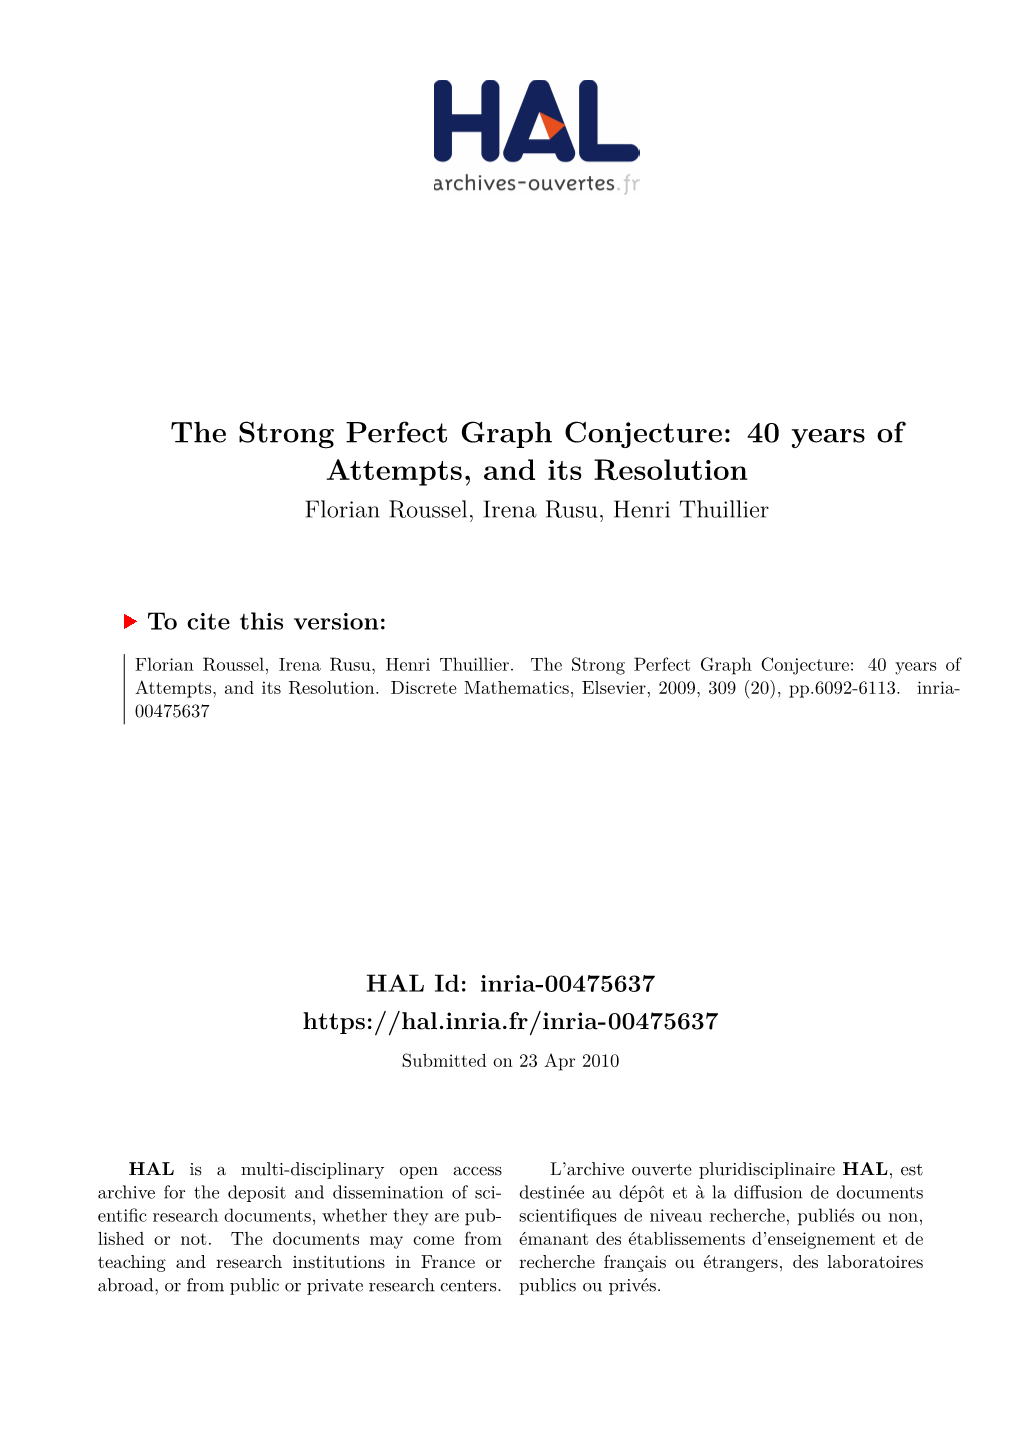 The Strong Perfect Graph Conjecture: 40 Years of Attempts, and Its Resolution Florian Roussel, Irena Rusu, Henri Thuillier